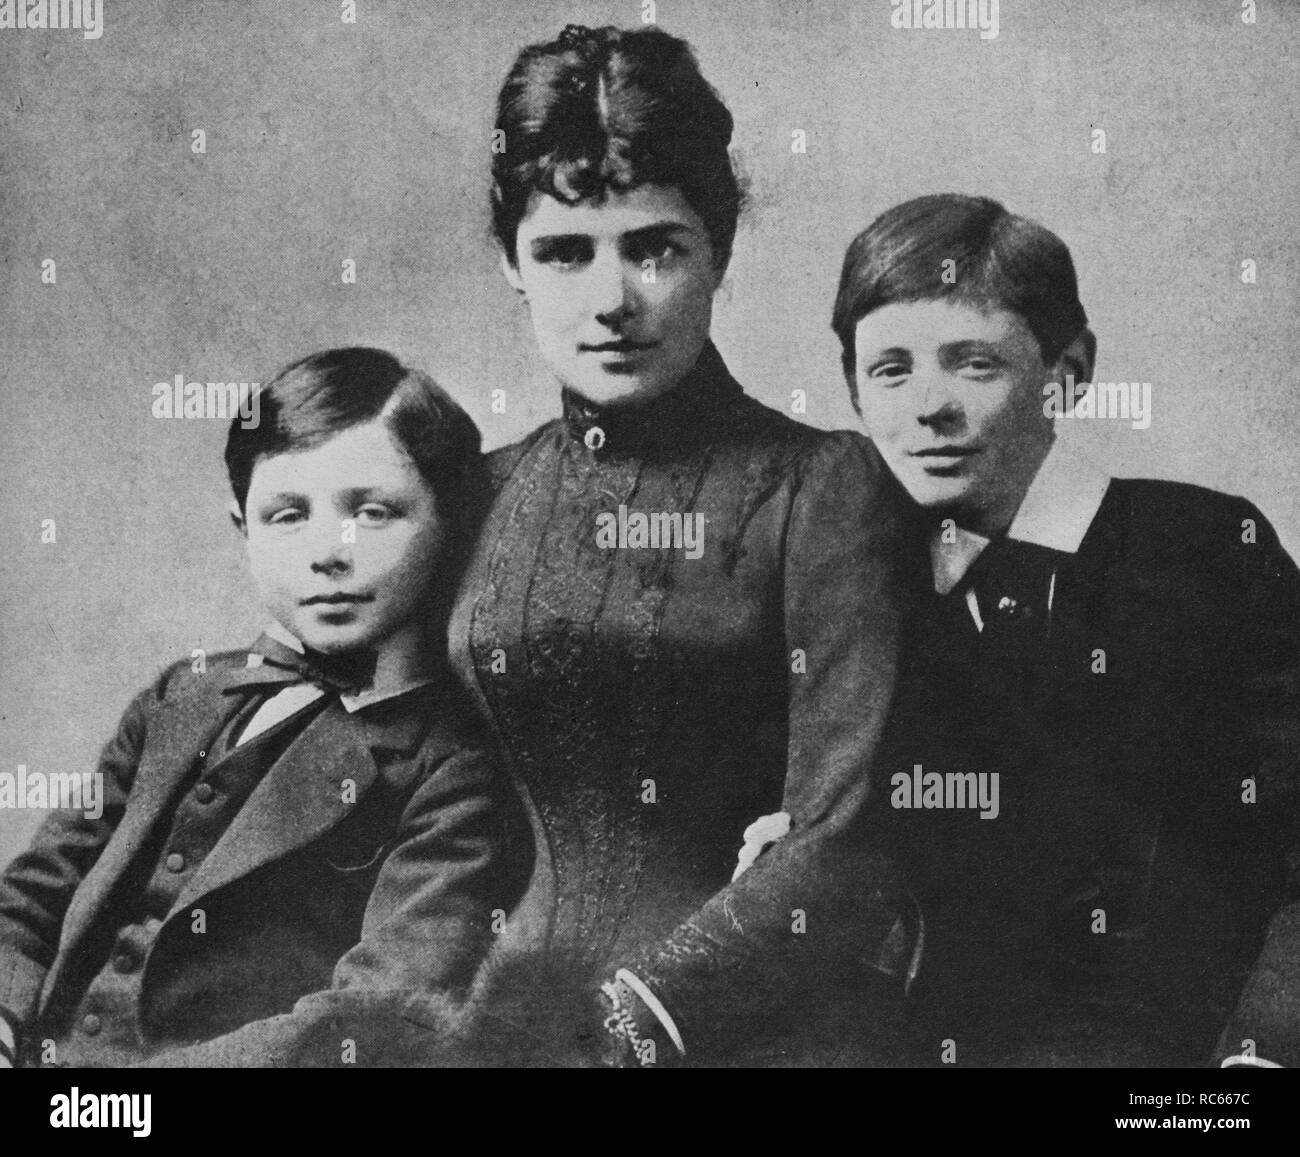 Winston Churchill's Mother with her two sons, Jack and Winston. 1889. Stock Photo